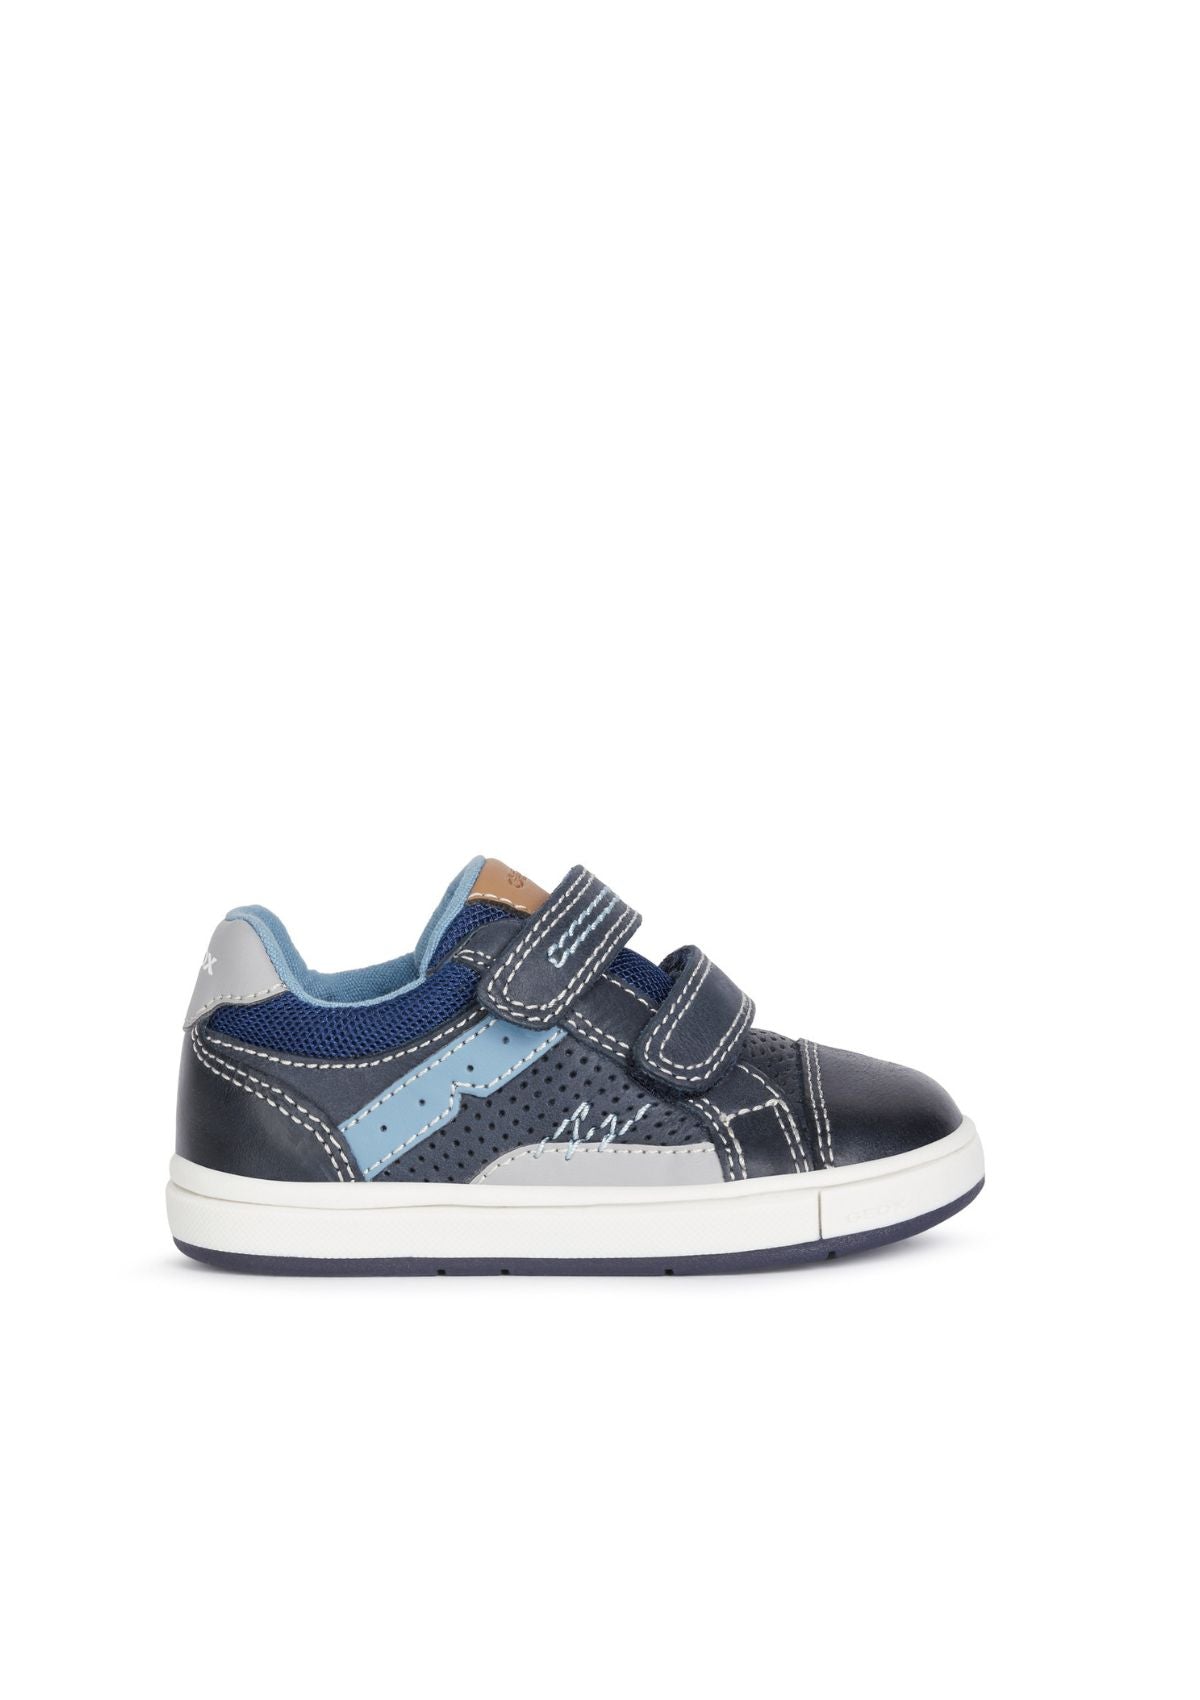 Geox Baby Boys Trainers TROTTOLA Navy White side